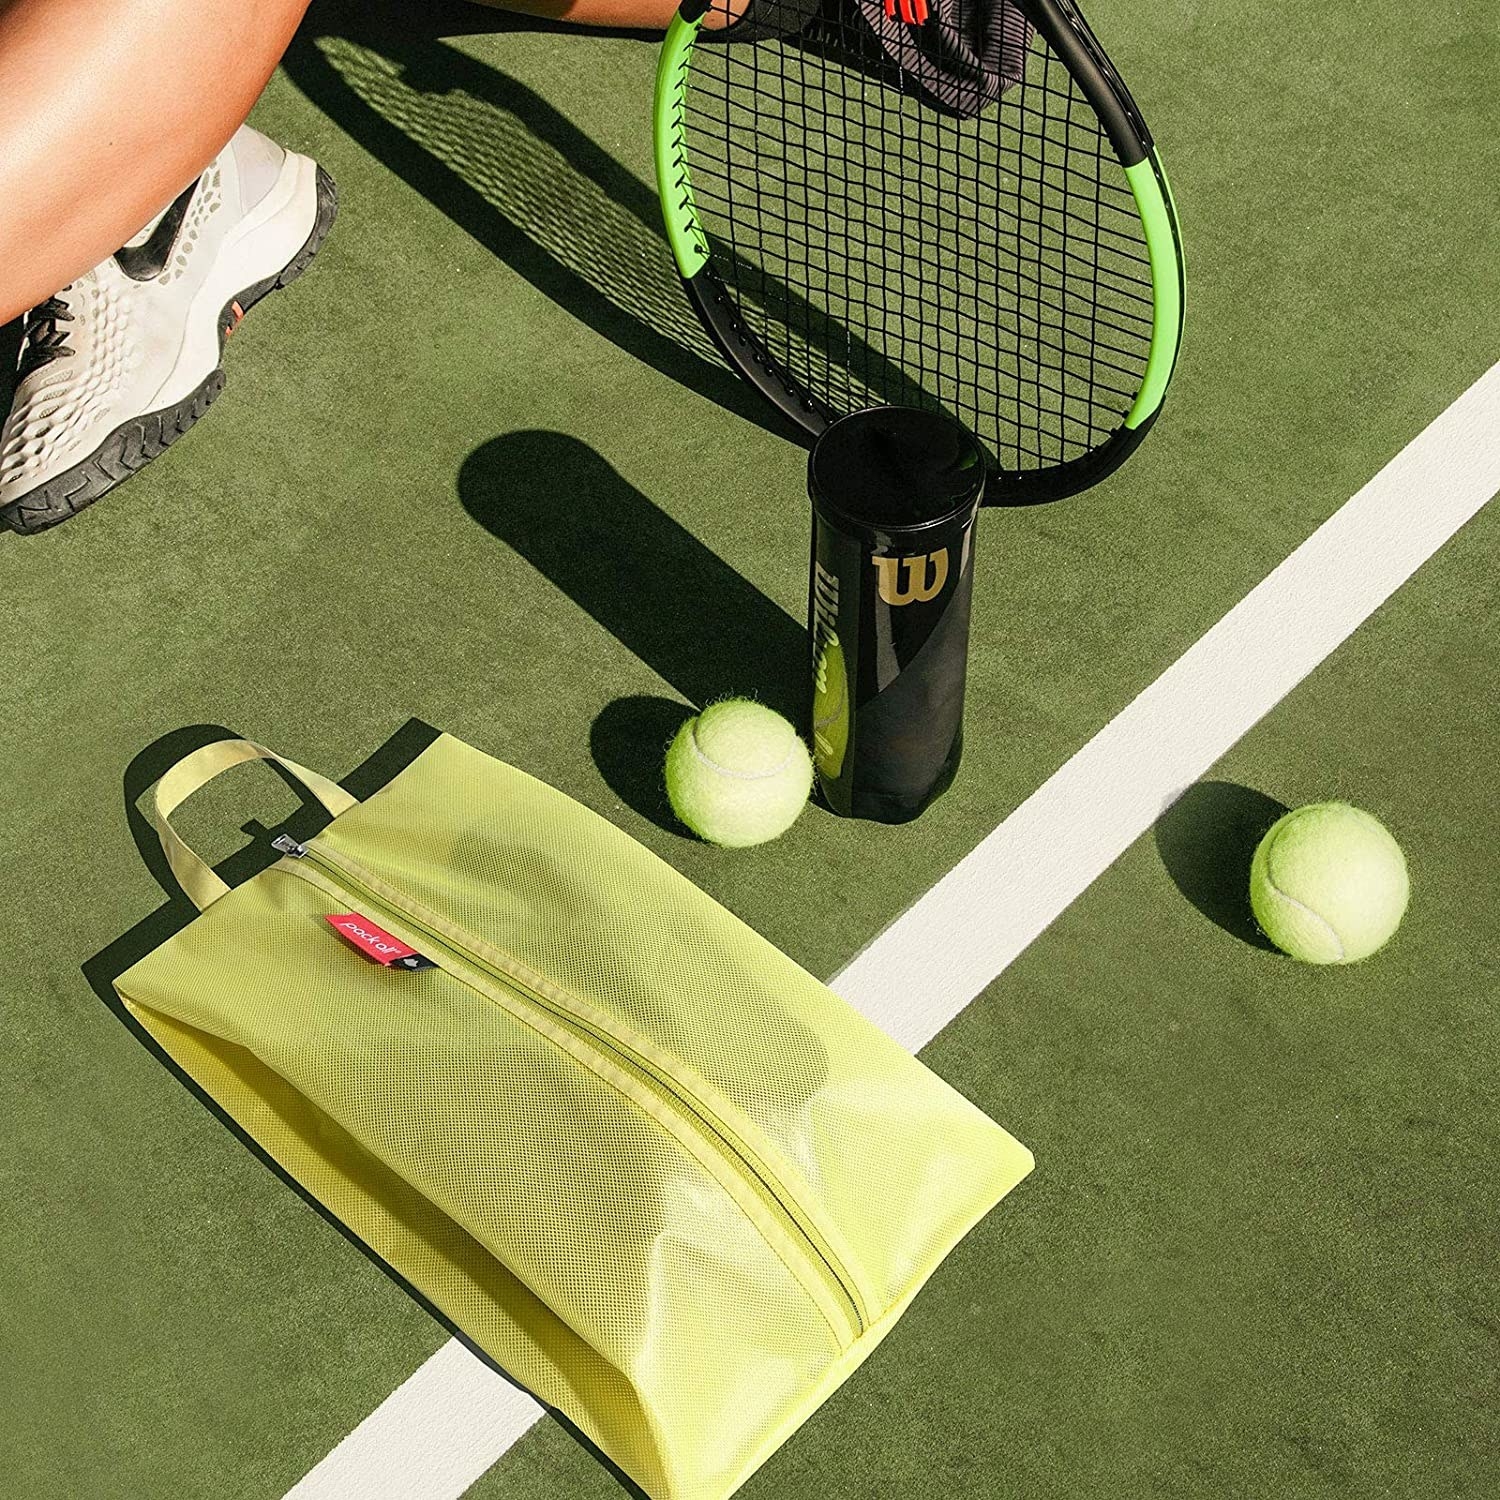 The bag next to a person holding tennis racket